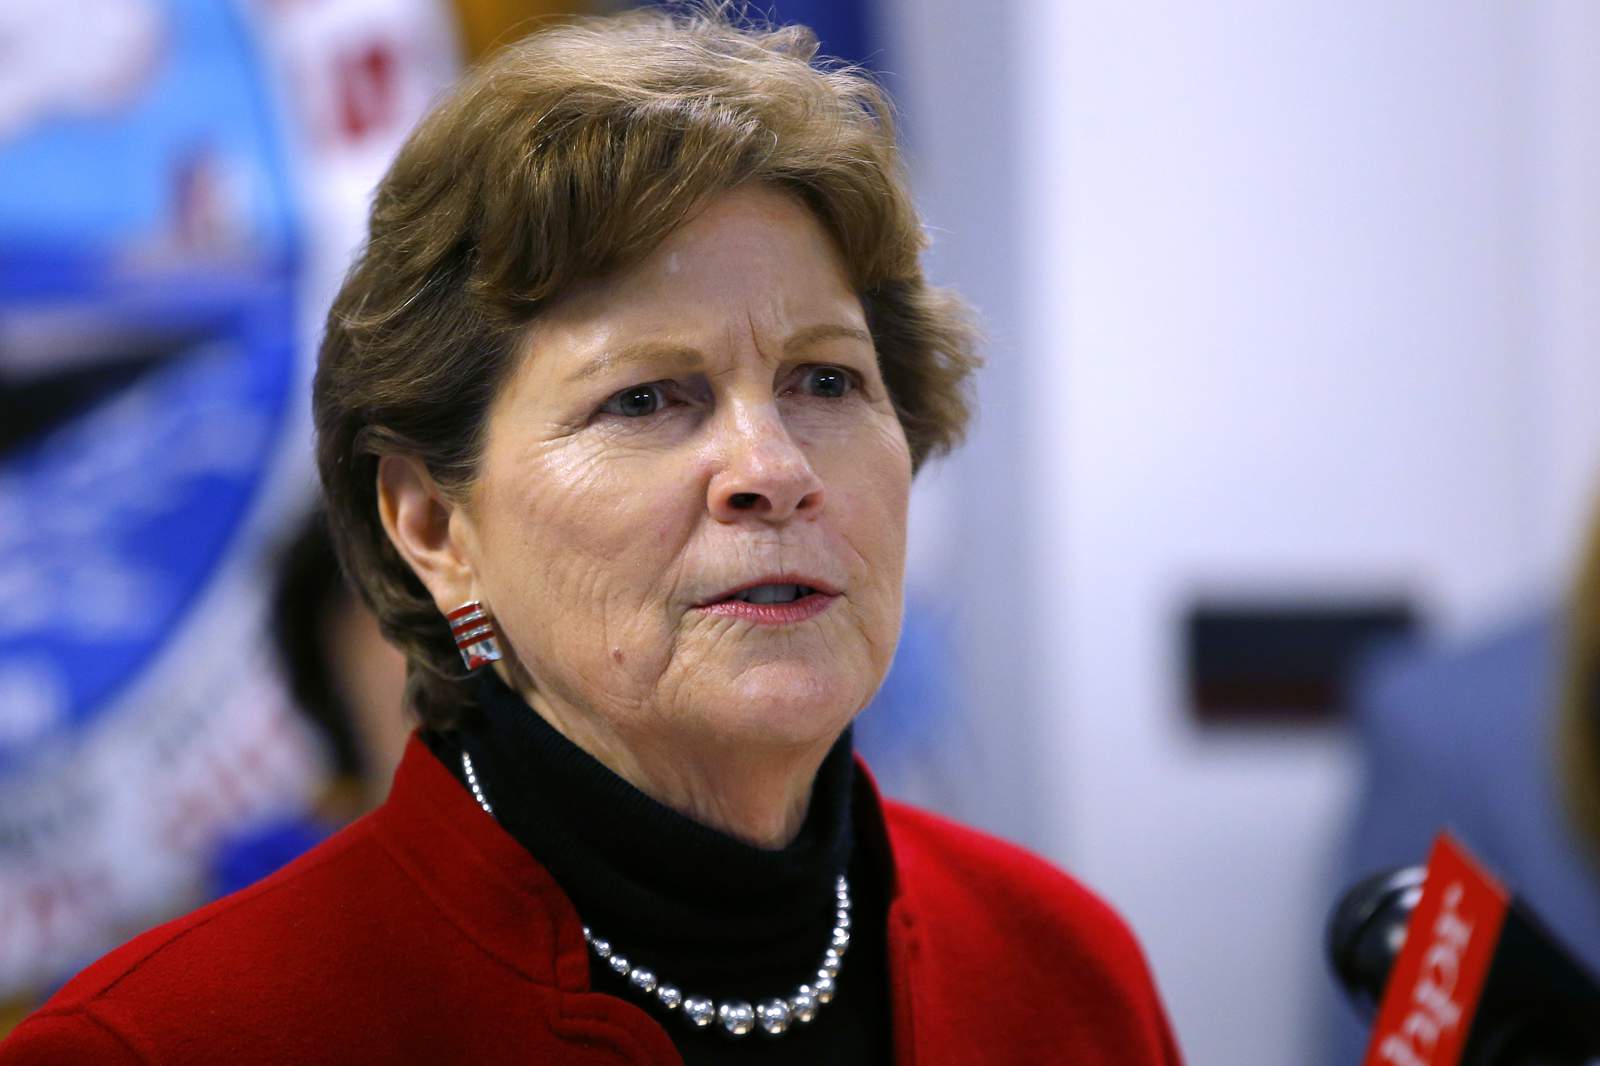 4 Republicans compete for chance to take on Sen. Shaheen